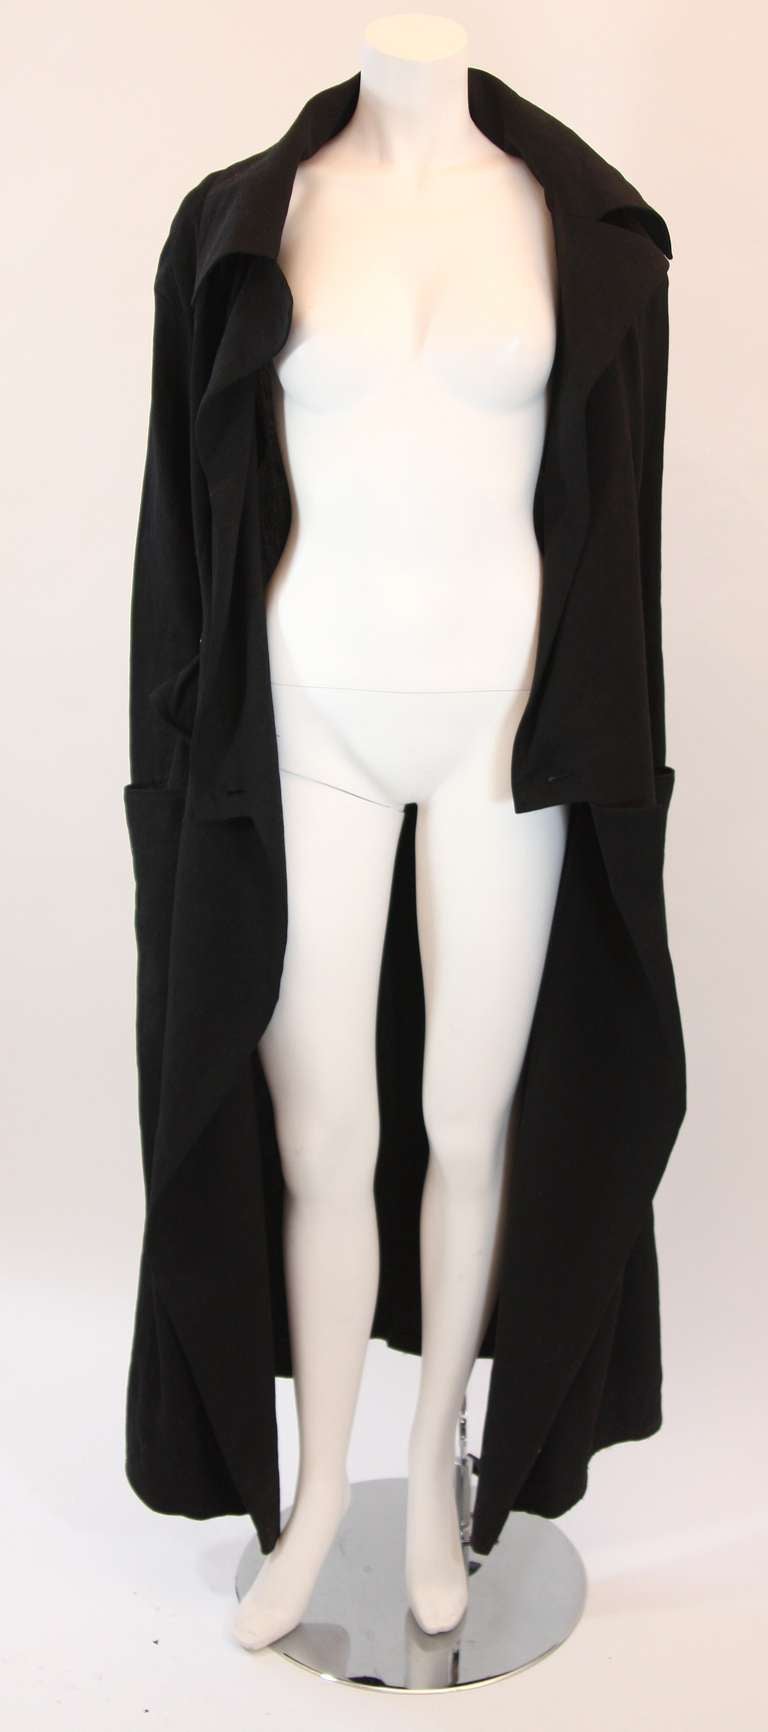 This is a magnificently designed trench coat by Yohji Yamamoto. The large draping pockets at the hip are a dramatic yet subtle detail in true Yamamoto form.  This is a great piece for any season. It features a two button closure which when closed